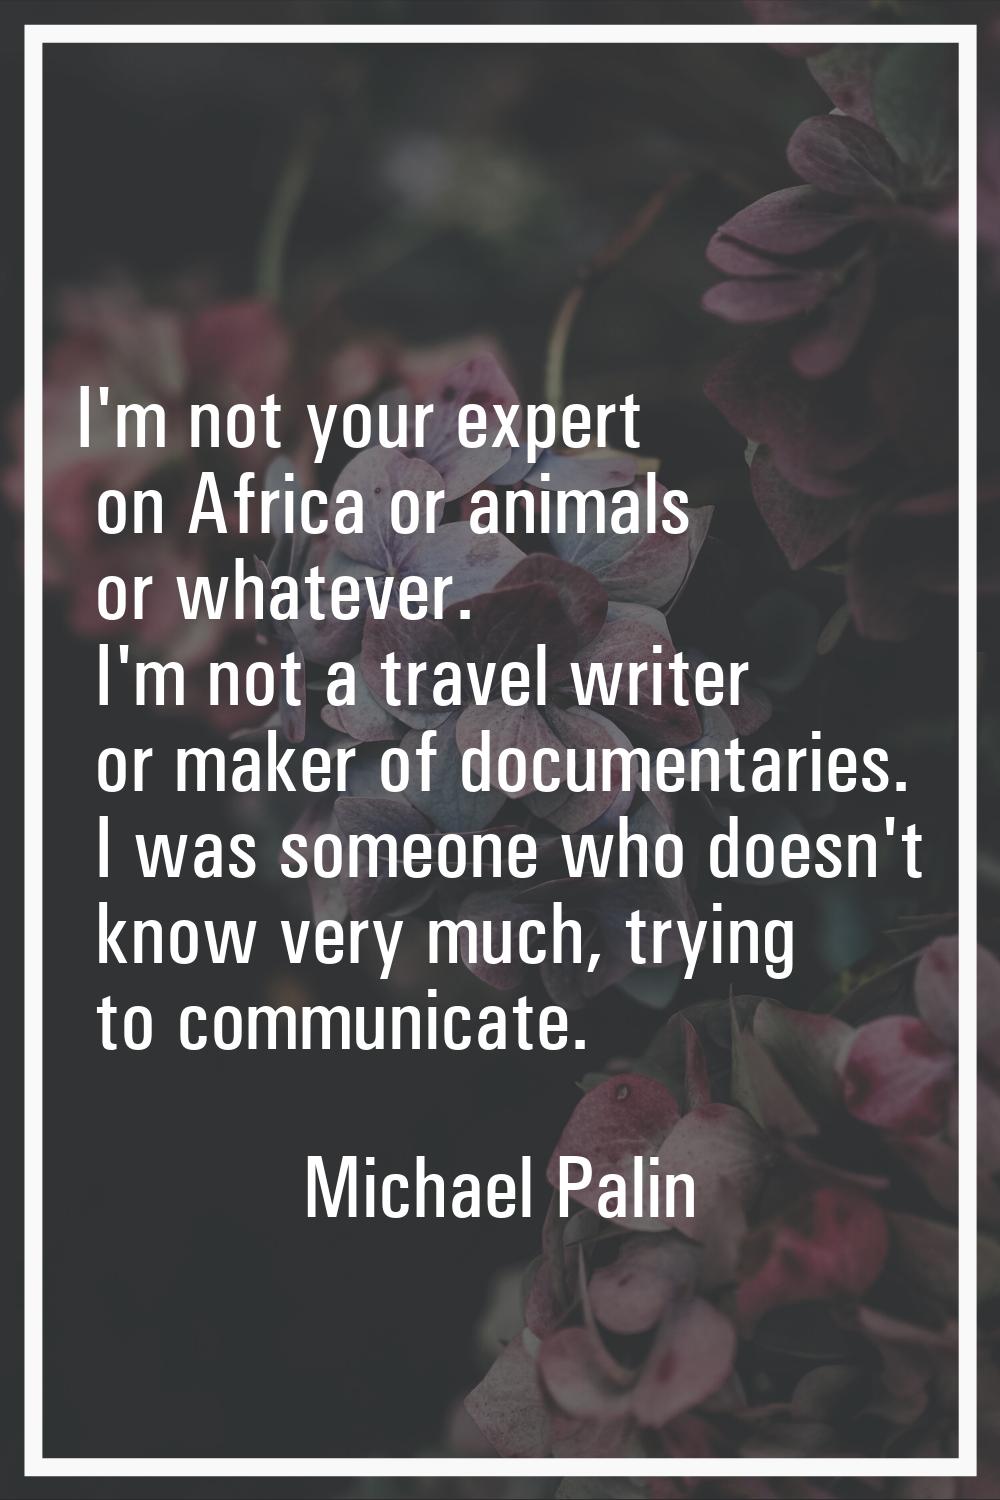 I'm not your expert on Africa or animals or whatever. I'm not a travel writer or maker of documenta